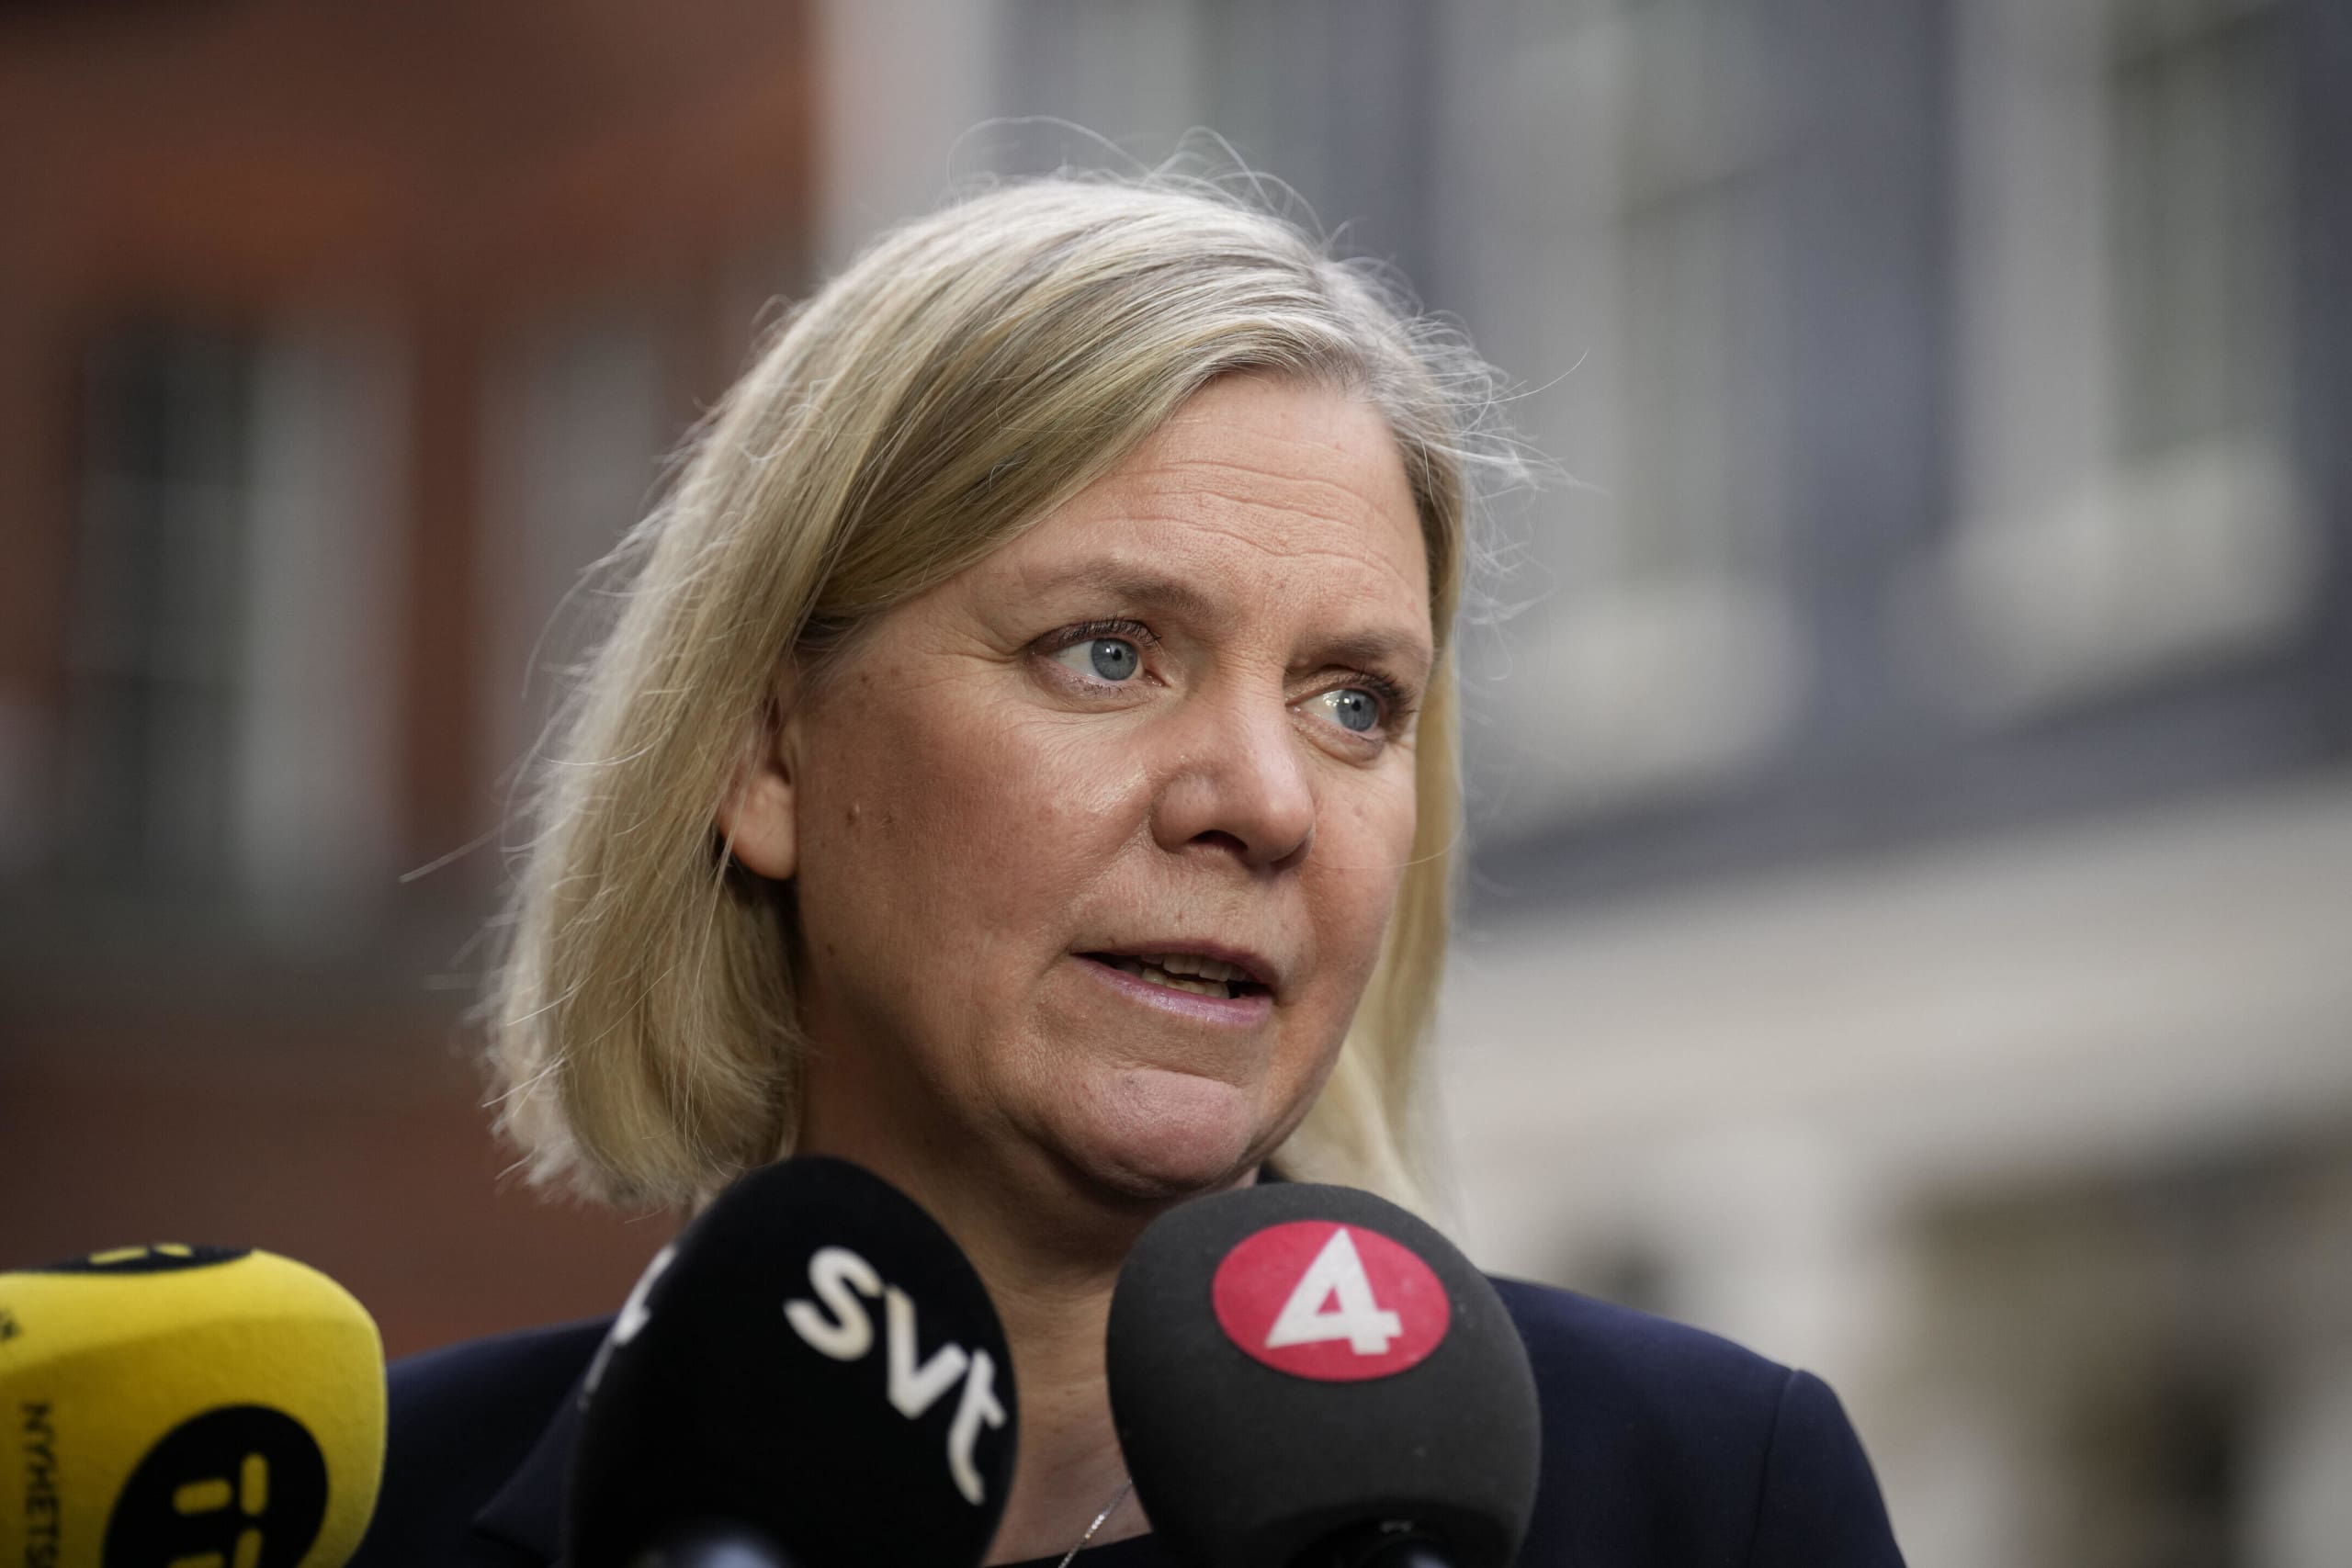 After Muslim riots in Sweden, Swedish PM says integration has failed, immigrants fuel gang crime